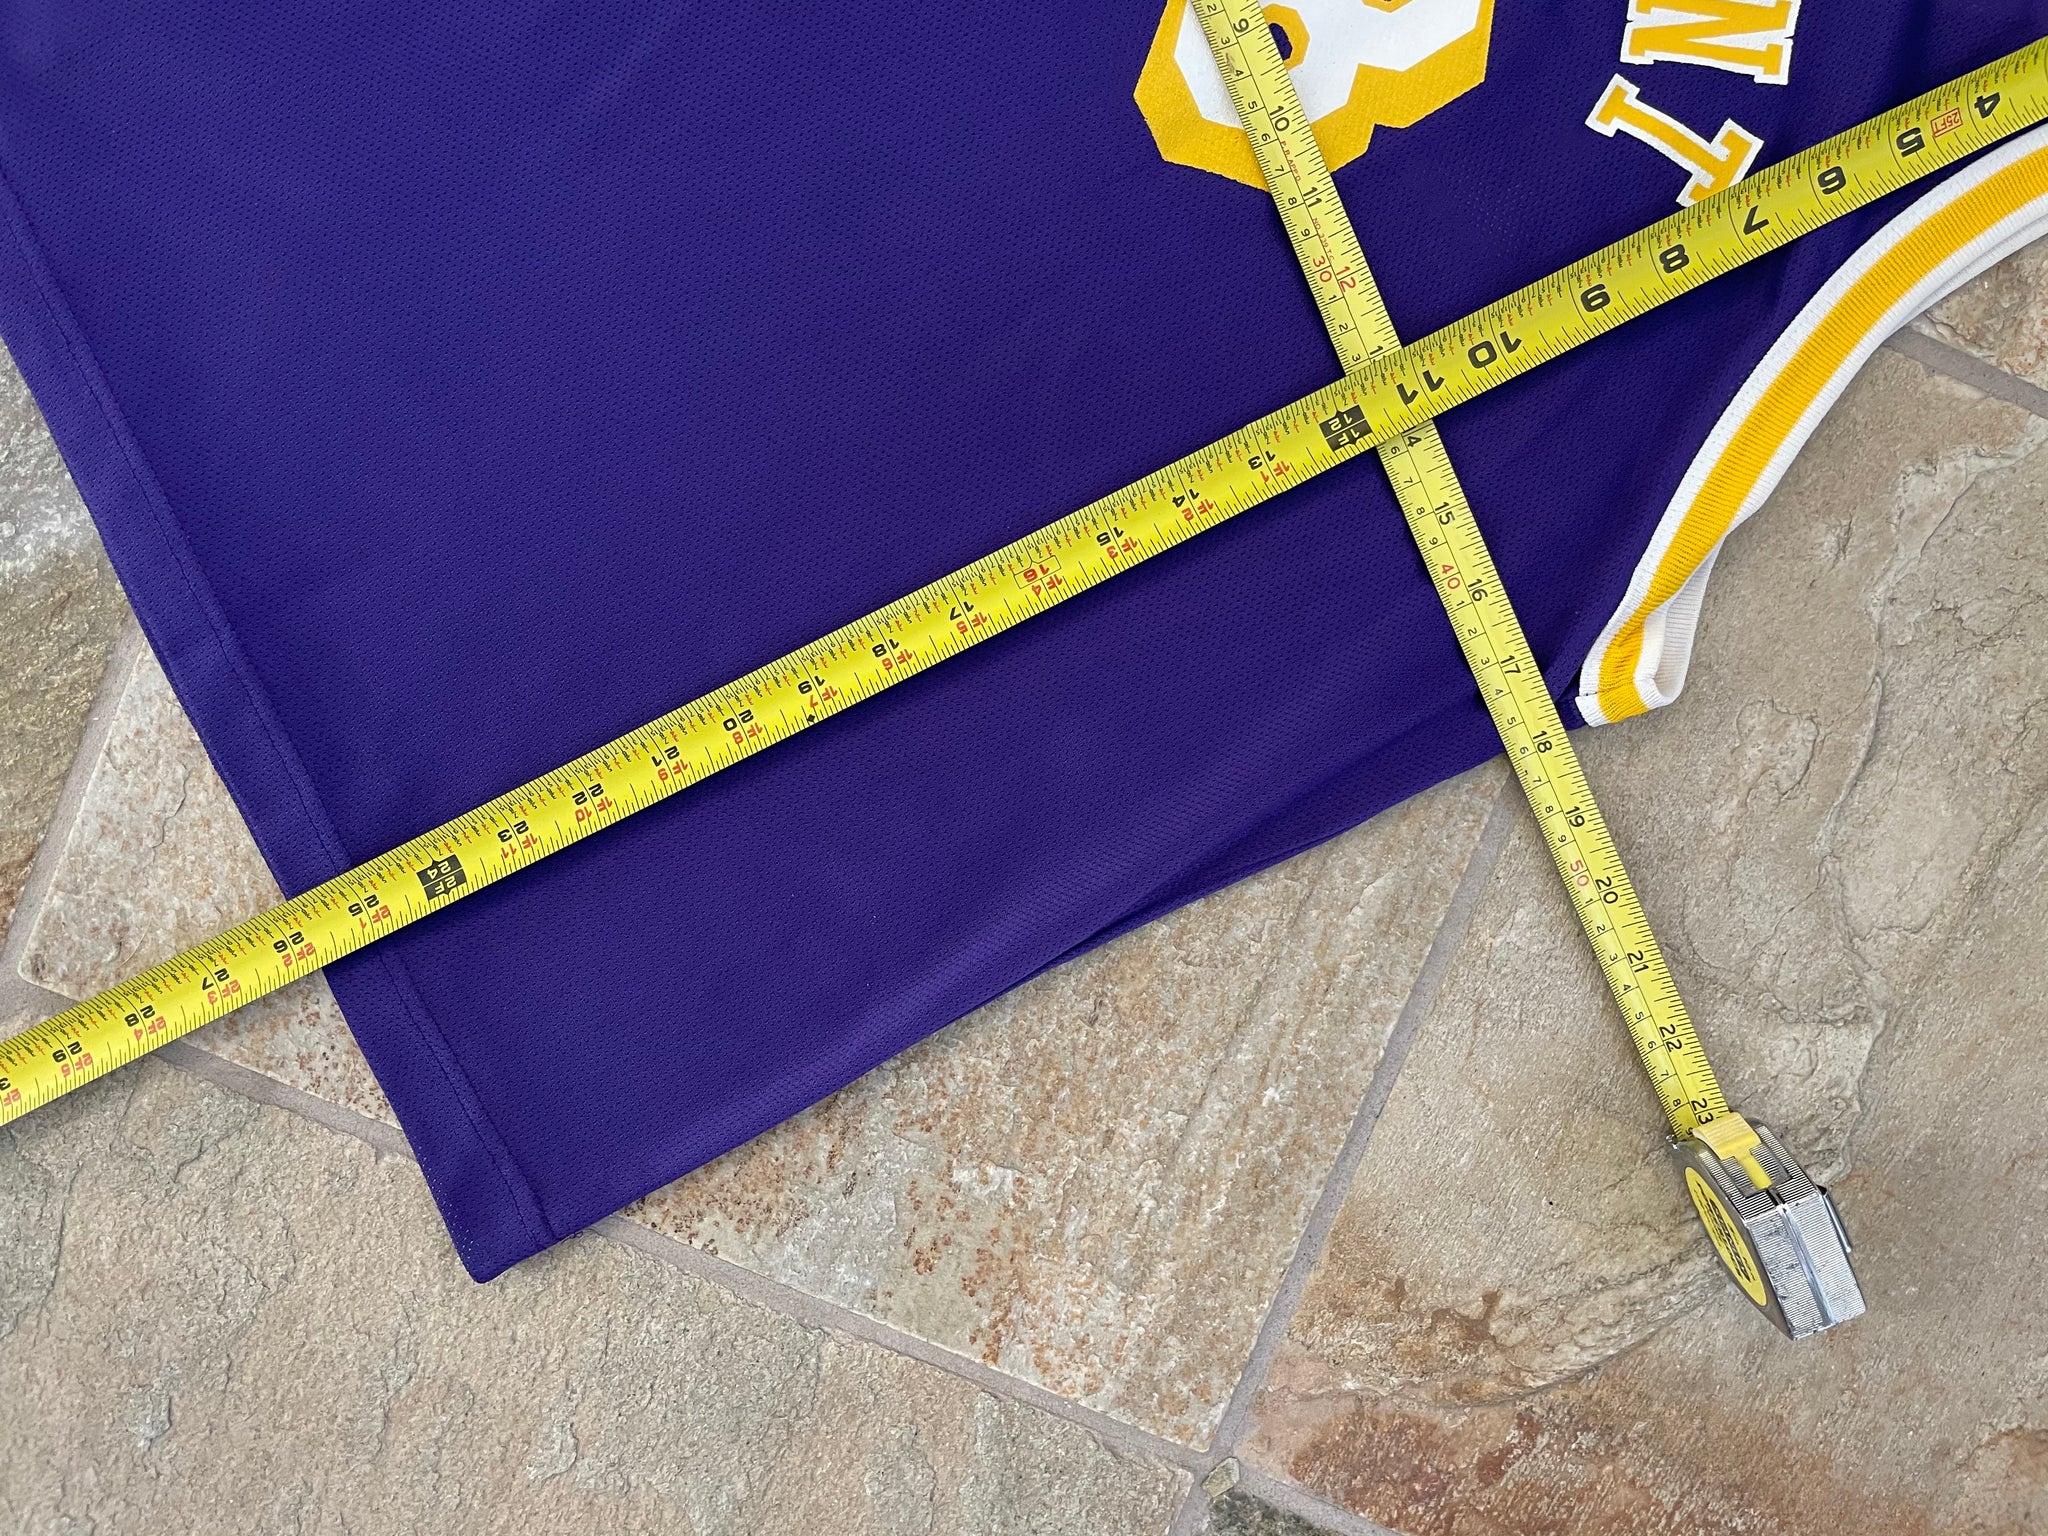 Vintage Los Angeles Lakers Kobe Bryant Champion Basketball Jersey, Siz –  Stuck In The 90s Sports